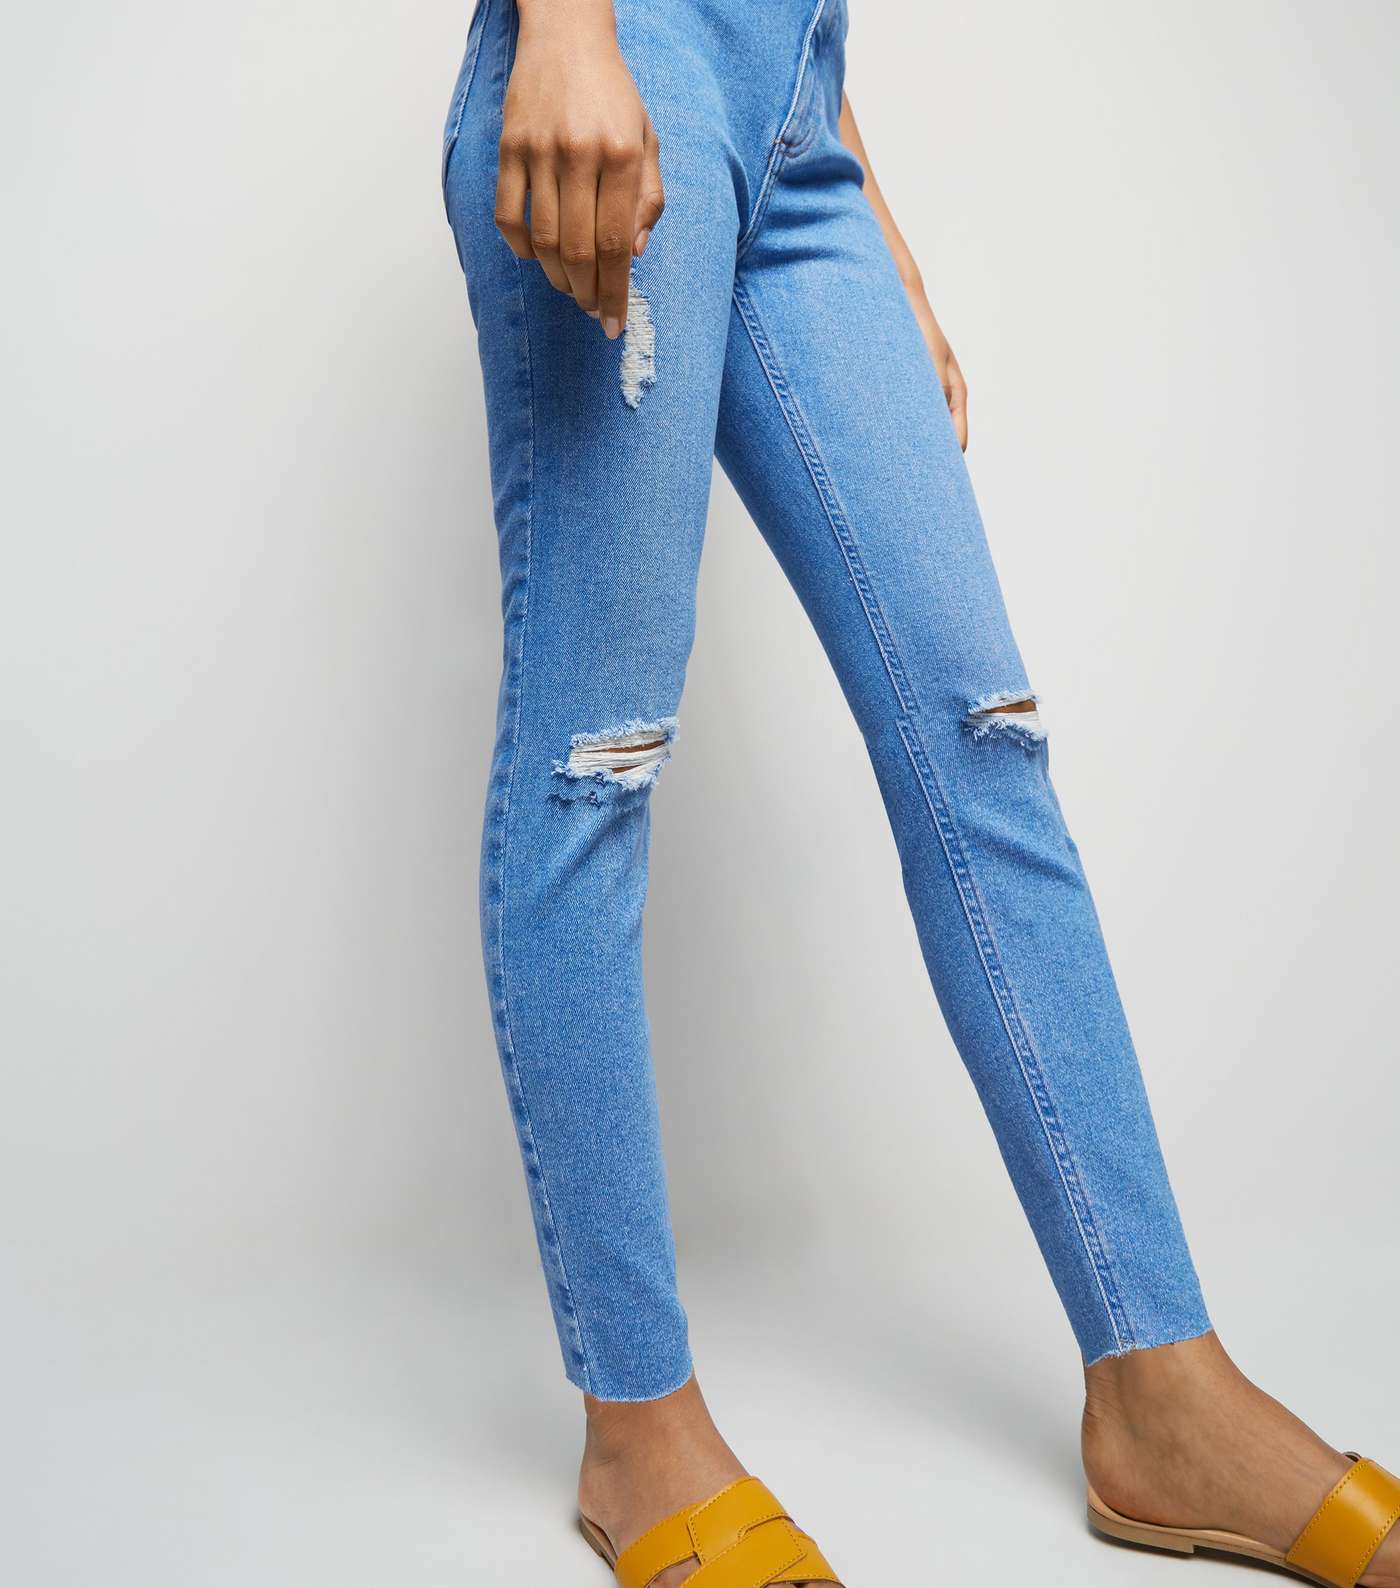 Petite Bright Blue High Waist Ripped Skinny Jeans Image 5